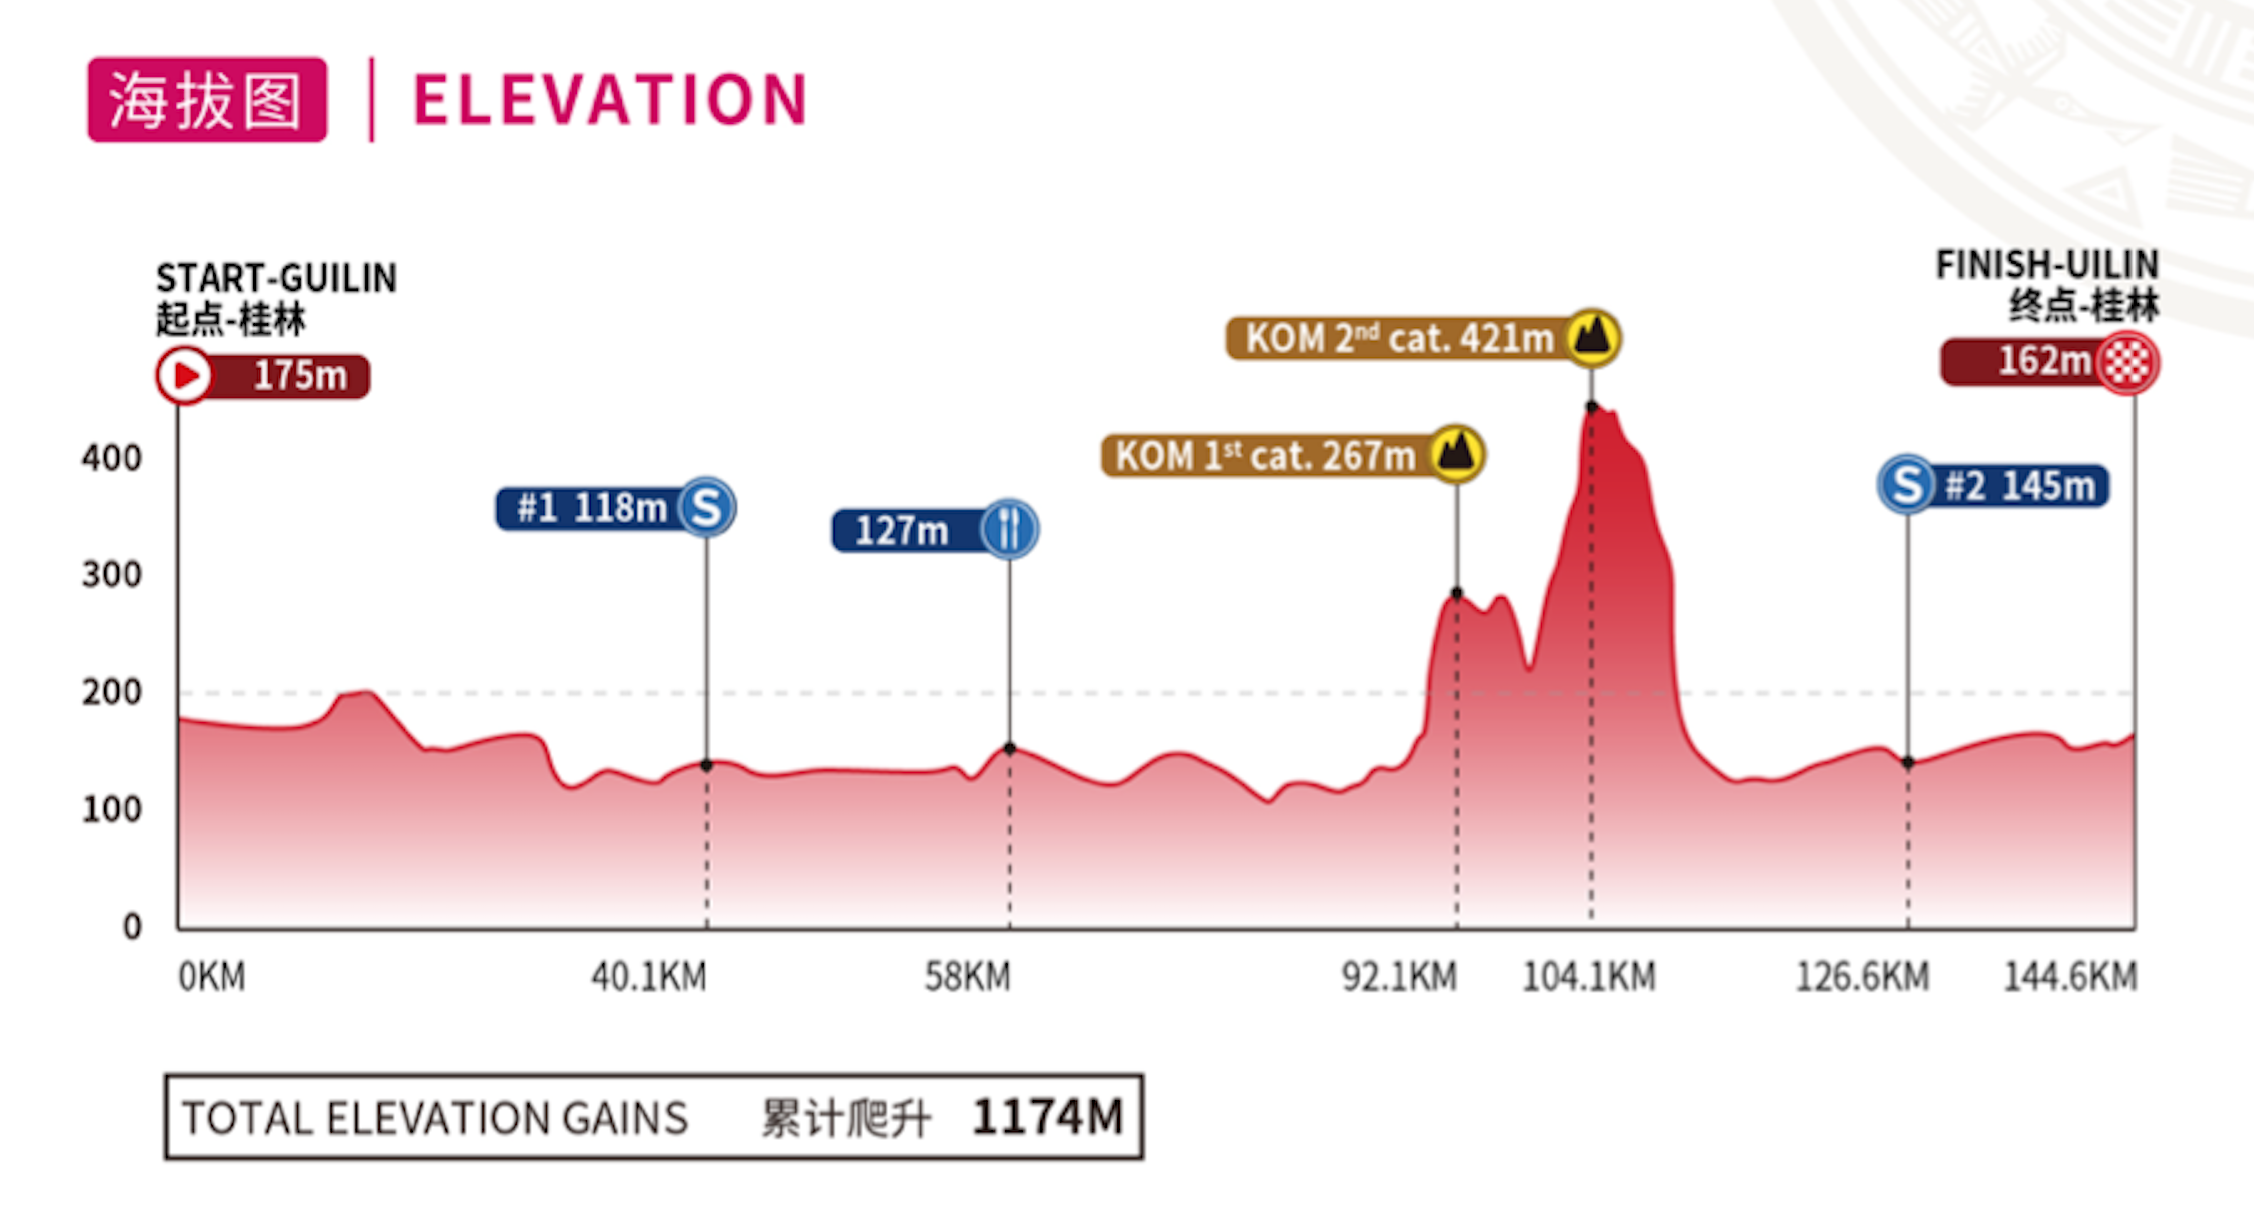 The elevation profile of the Tour of Guangxi, showing two climbs grouped closely together in the second half, and then a longer flat stretch to the finish. The total elevation gain is 1,174 meters.